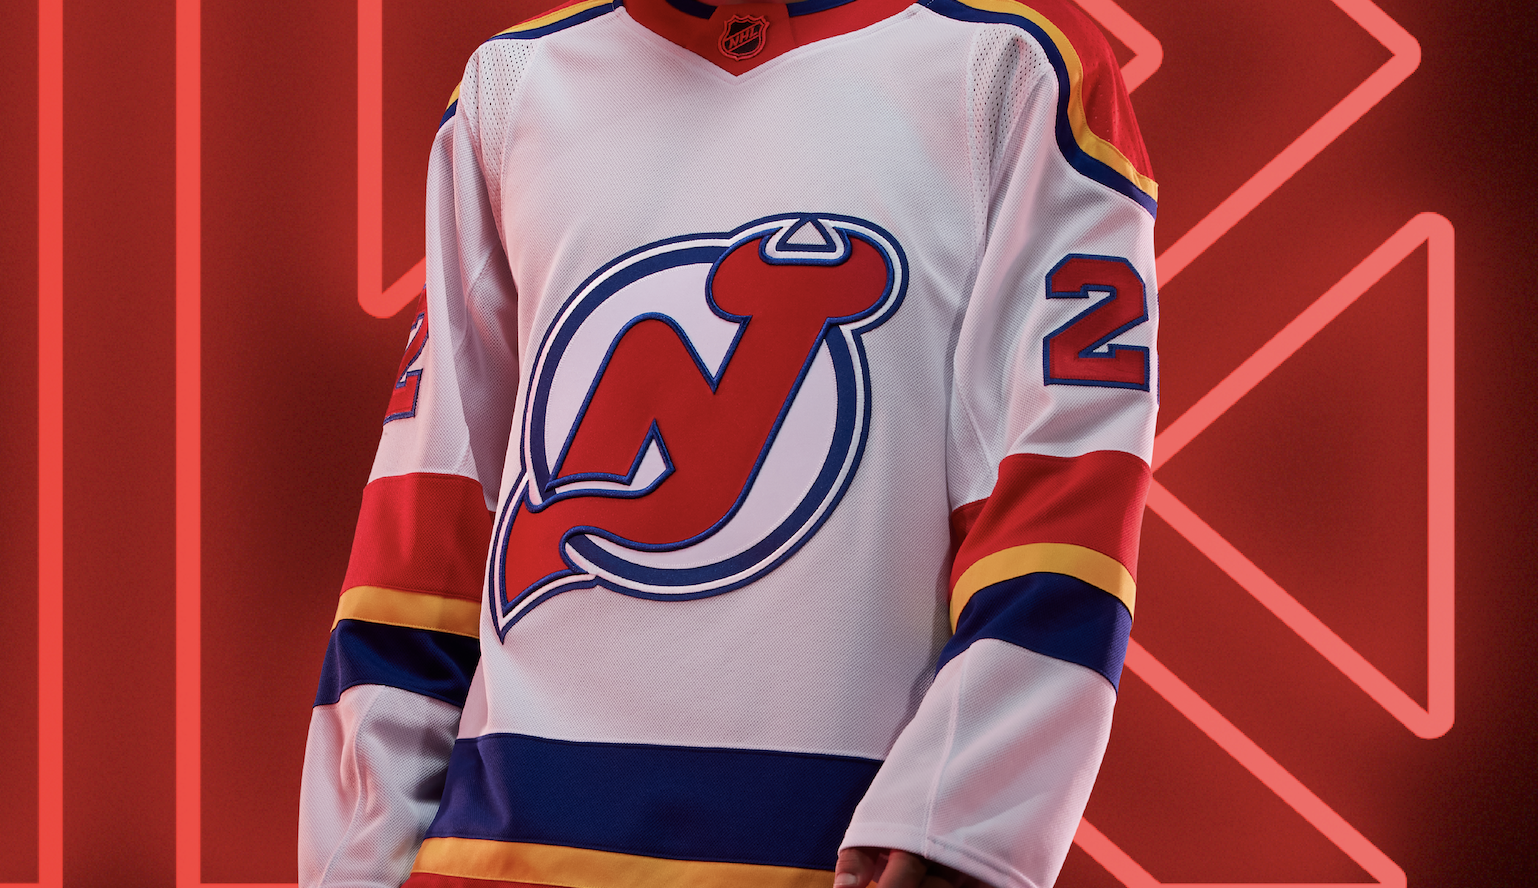 This is a really fun one. It remixes the current Devils’ uniforms with the iconic Colorado Rockies colorway. This one celebrates another anniversary as it's been 40 years since the Rockies were an NHL team.